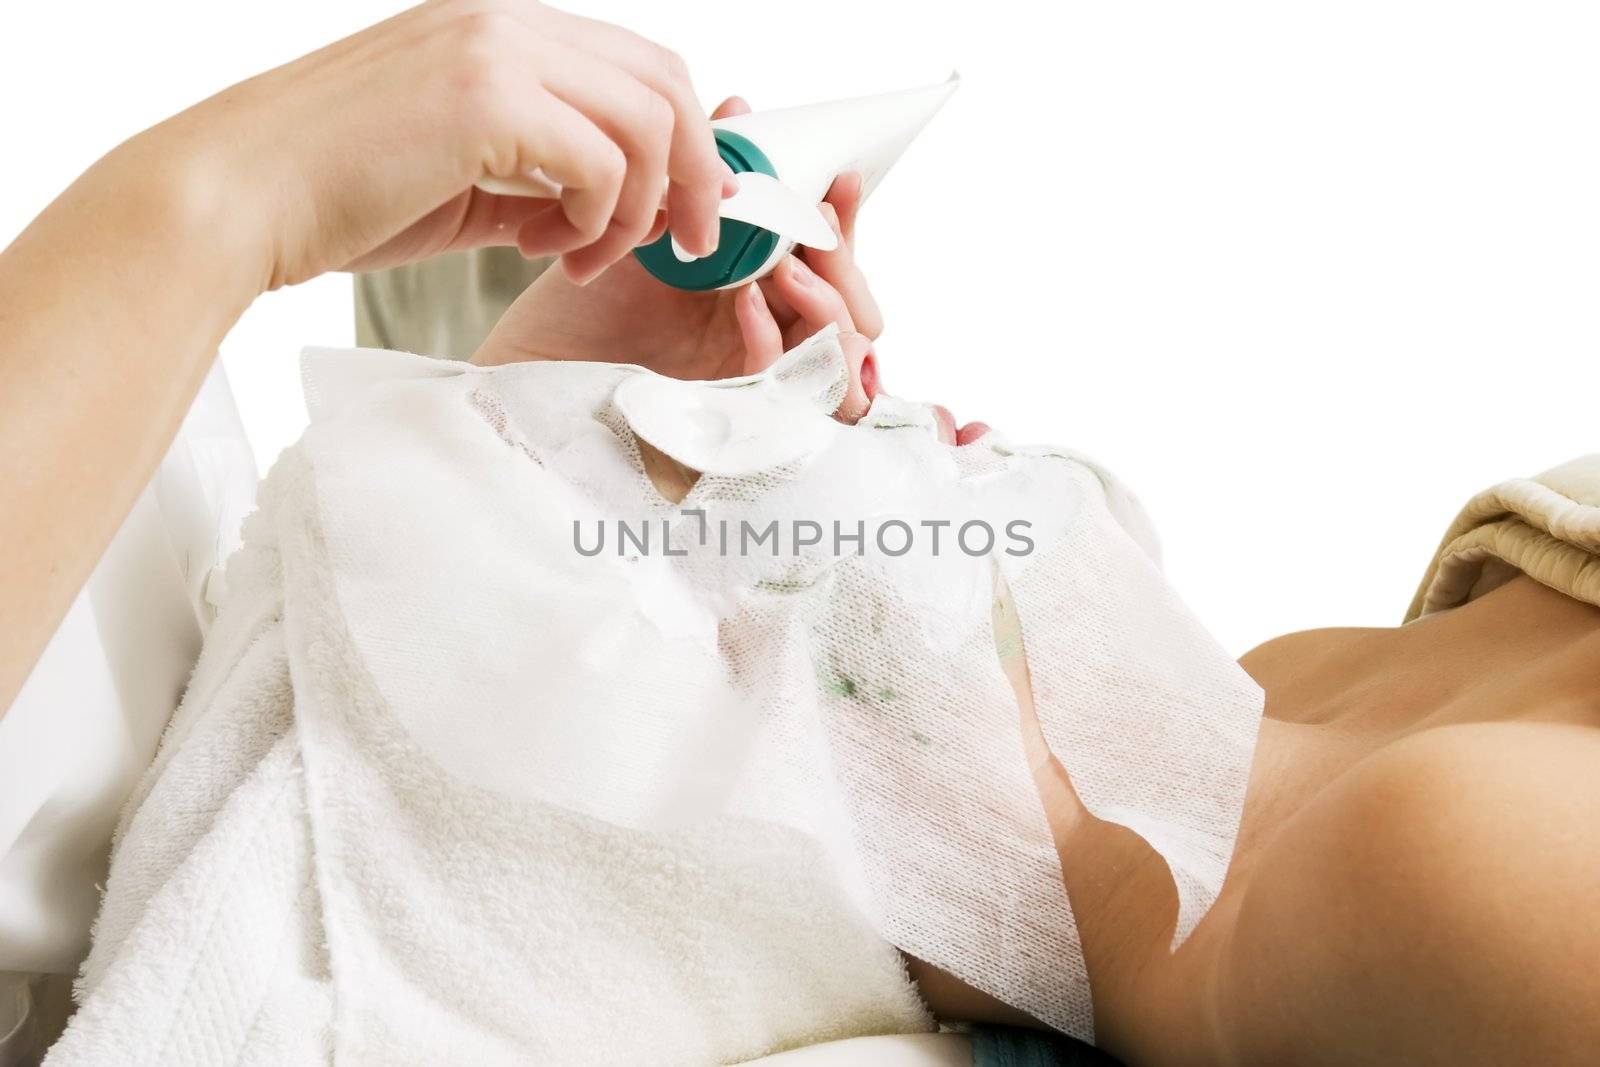 Lotion being applied to the face during a facial mask at a beauty spa.